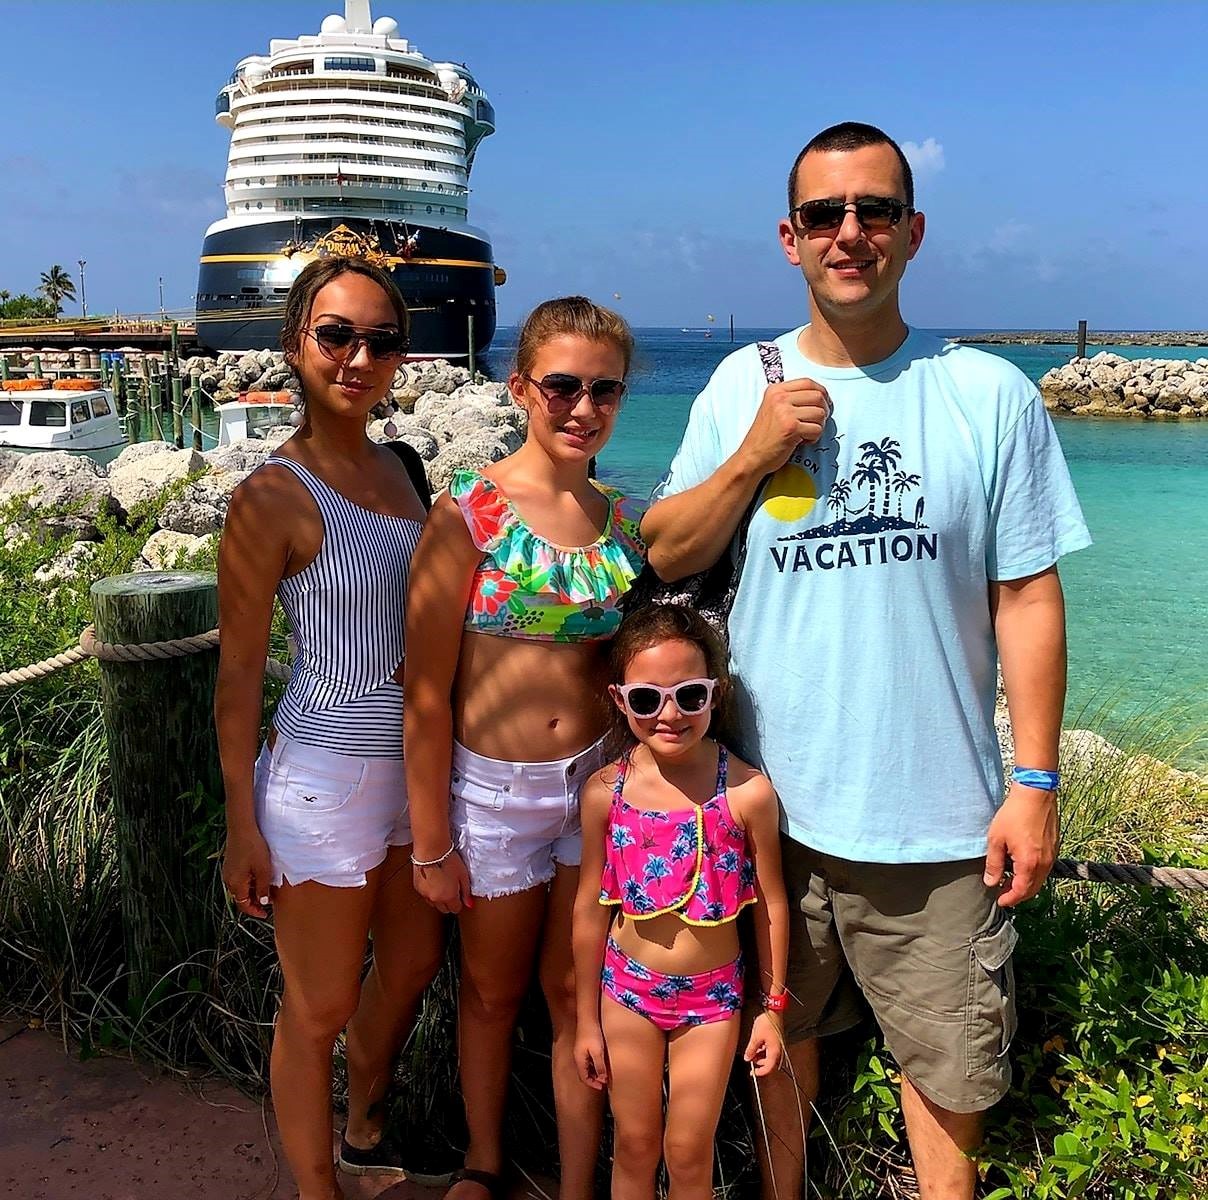 Mike and his family standing on the cruise boat